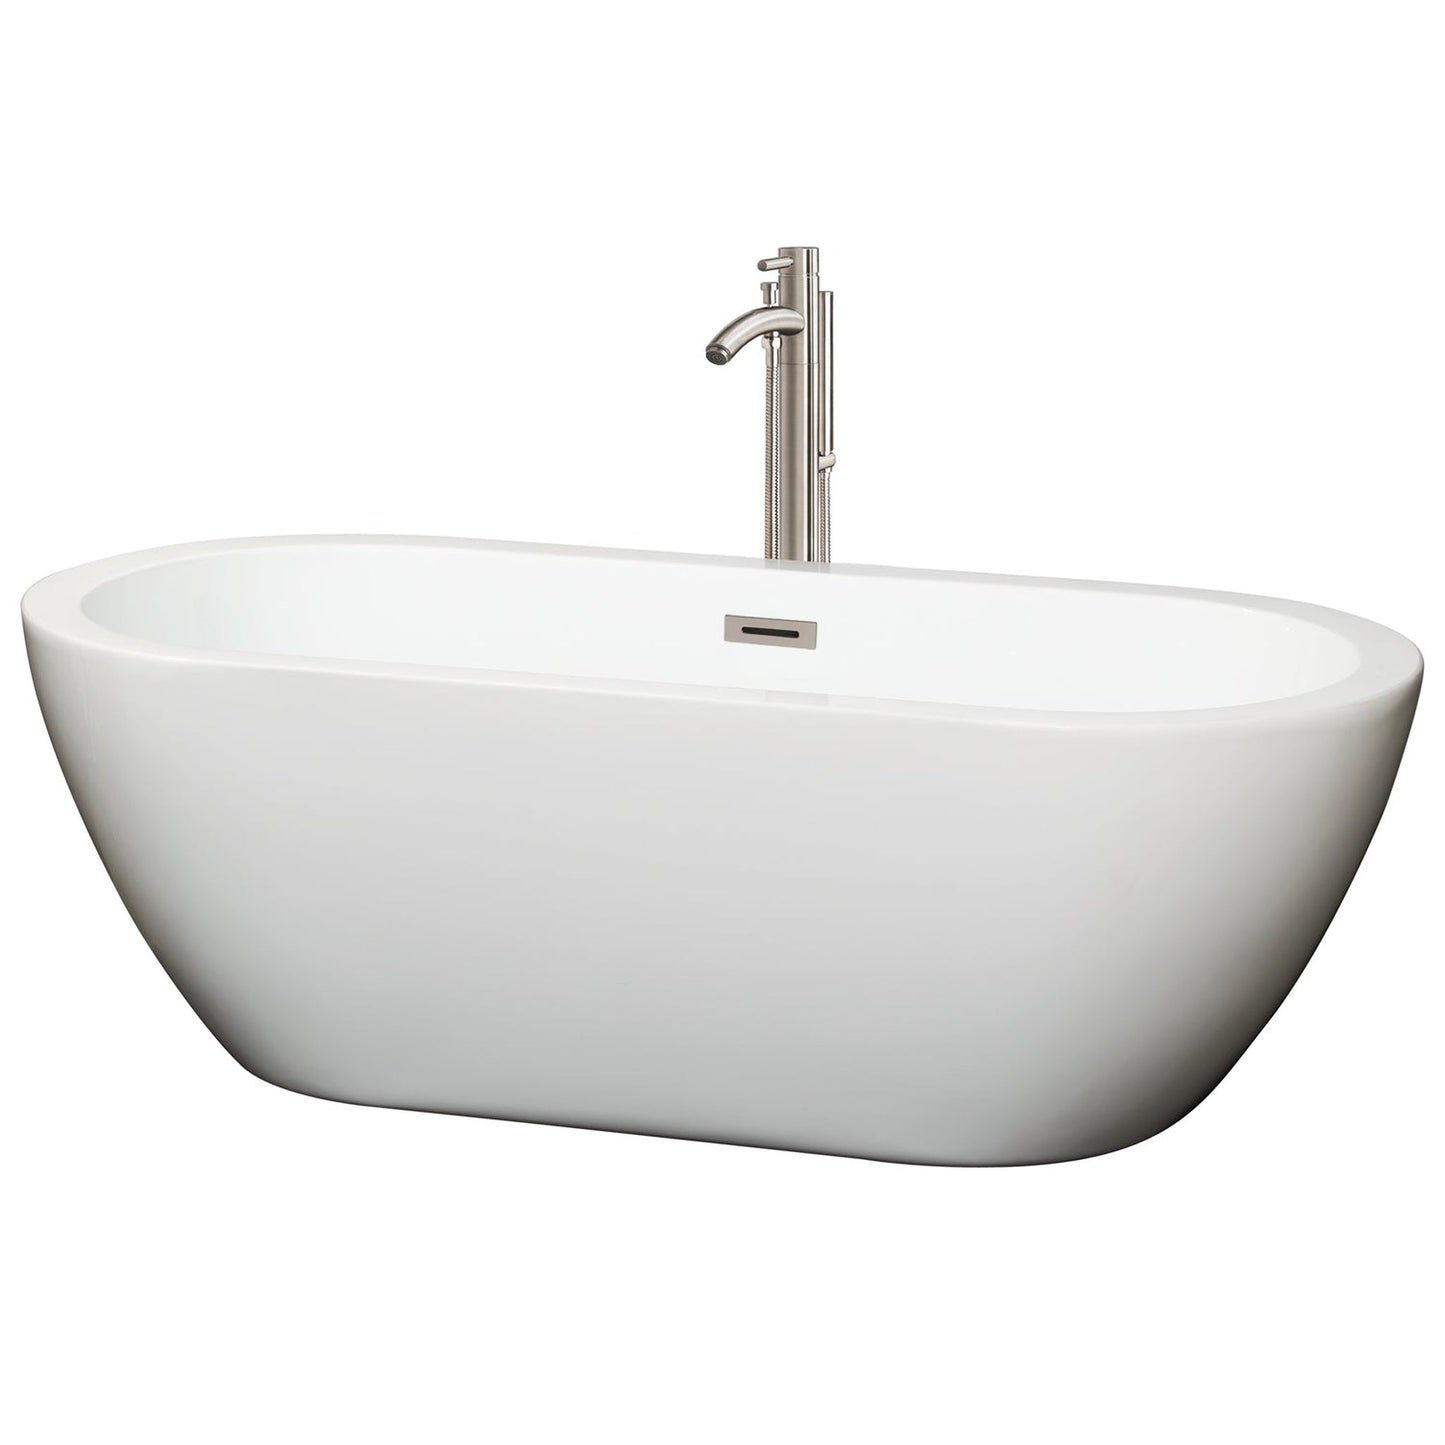 Wyndham Collection Soho 68" Freestanding Bathtub in White With Floor Mounted Faucet, Drain and Overflow Trim in Brushed Nickel